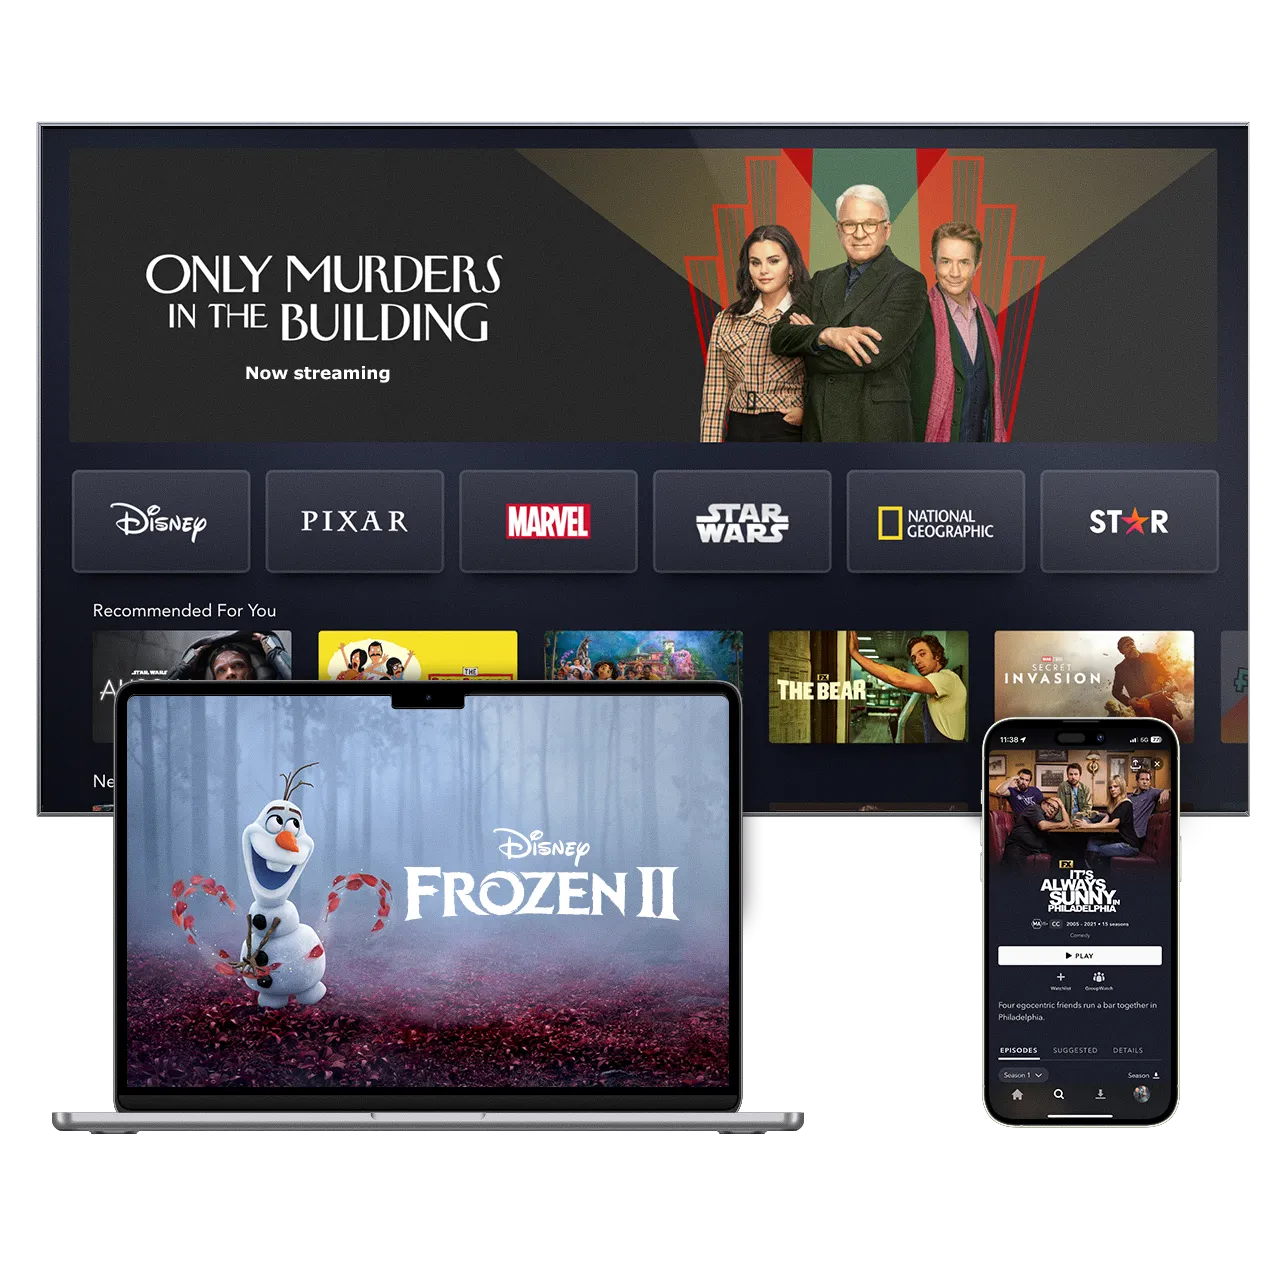 Disney+ available to stream on your TV, Laptop and mobile phones. This is an image of TV screen with the Disney+ UI screen with "Only Murderers in the Building", a laptop with "Frozen 2" and mobile phone with "It's Always Sunny in Philadelphia".